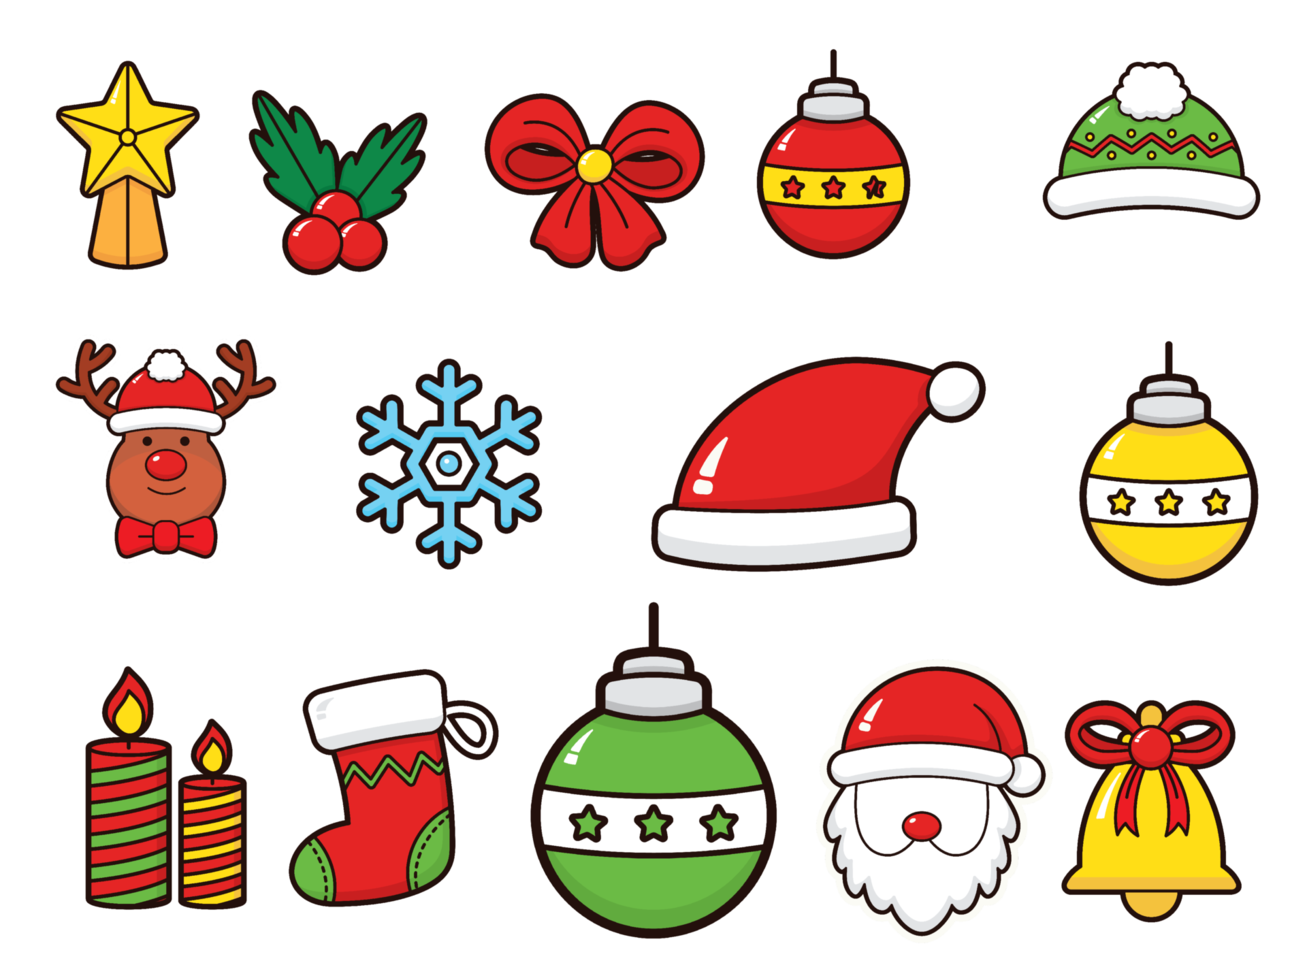 Merry Christmas Cute Stickers for holiday png